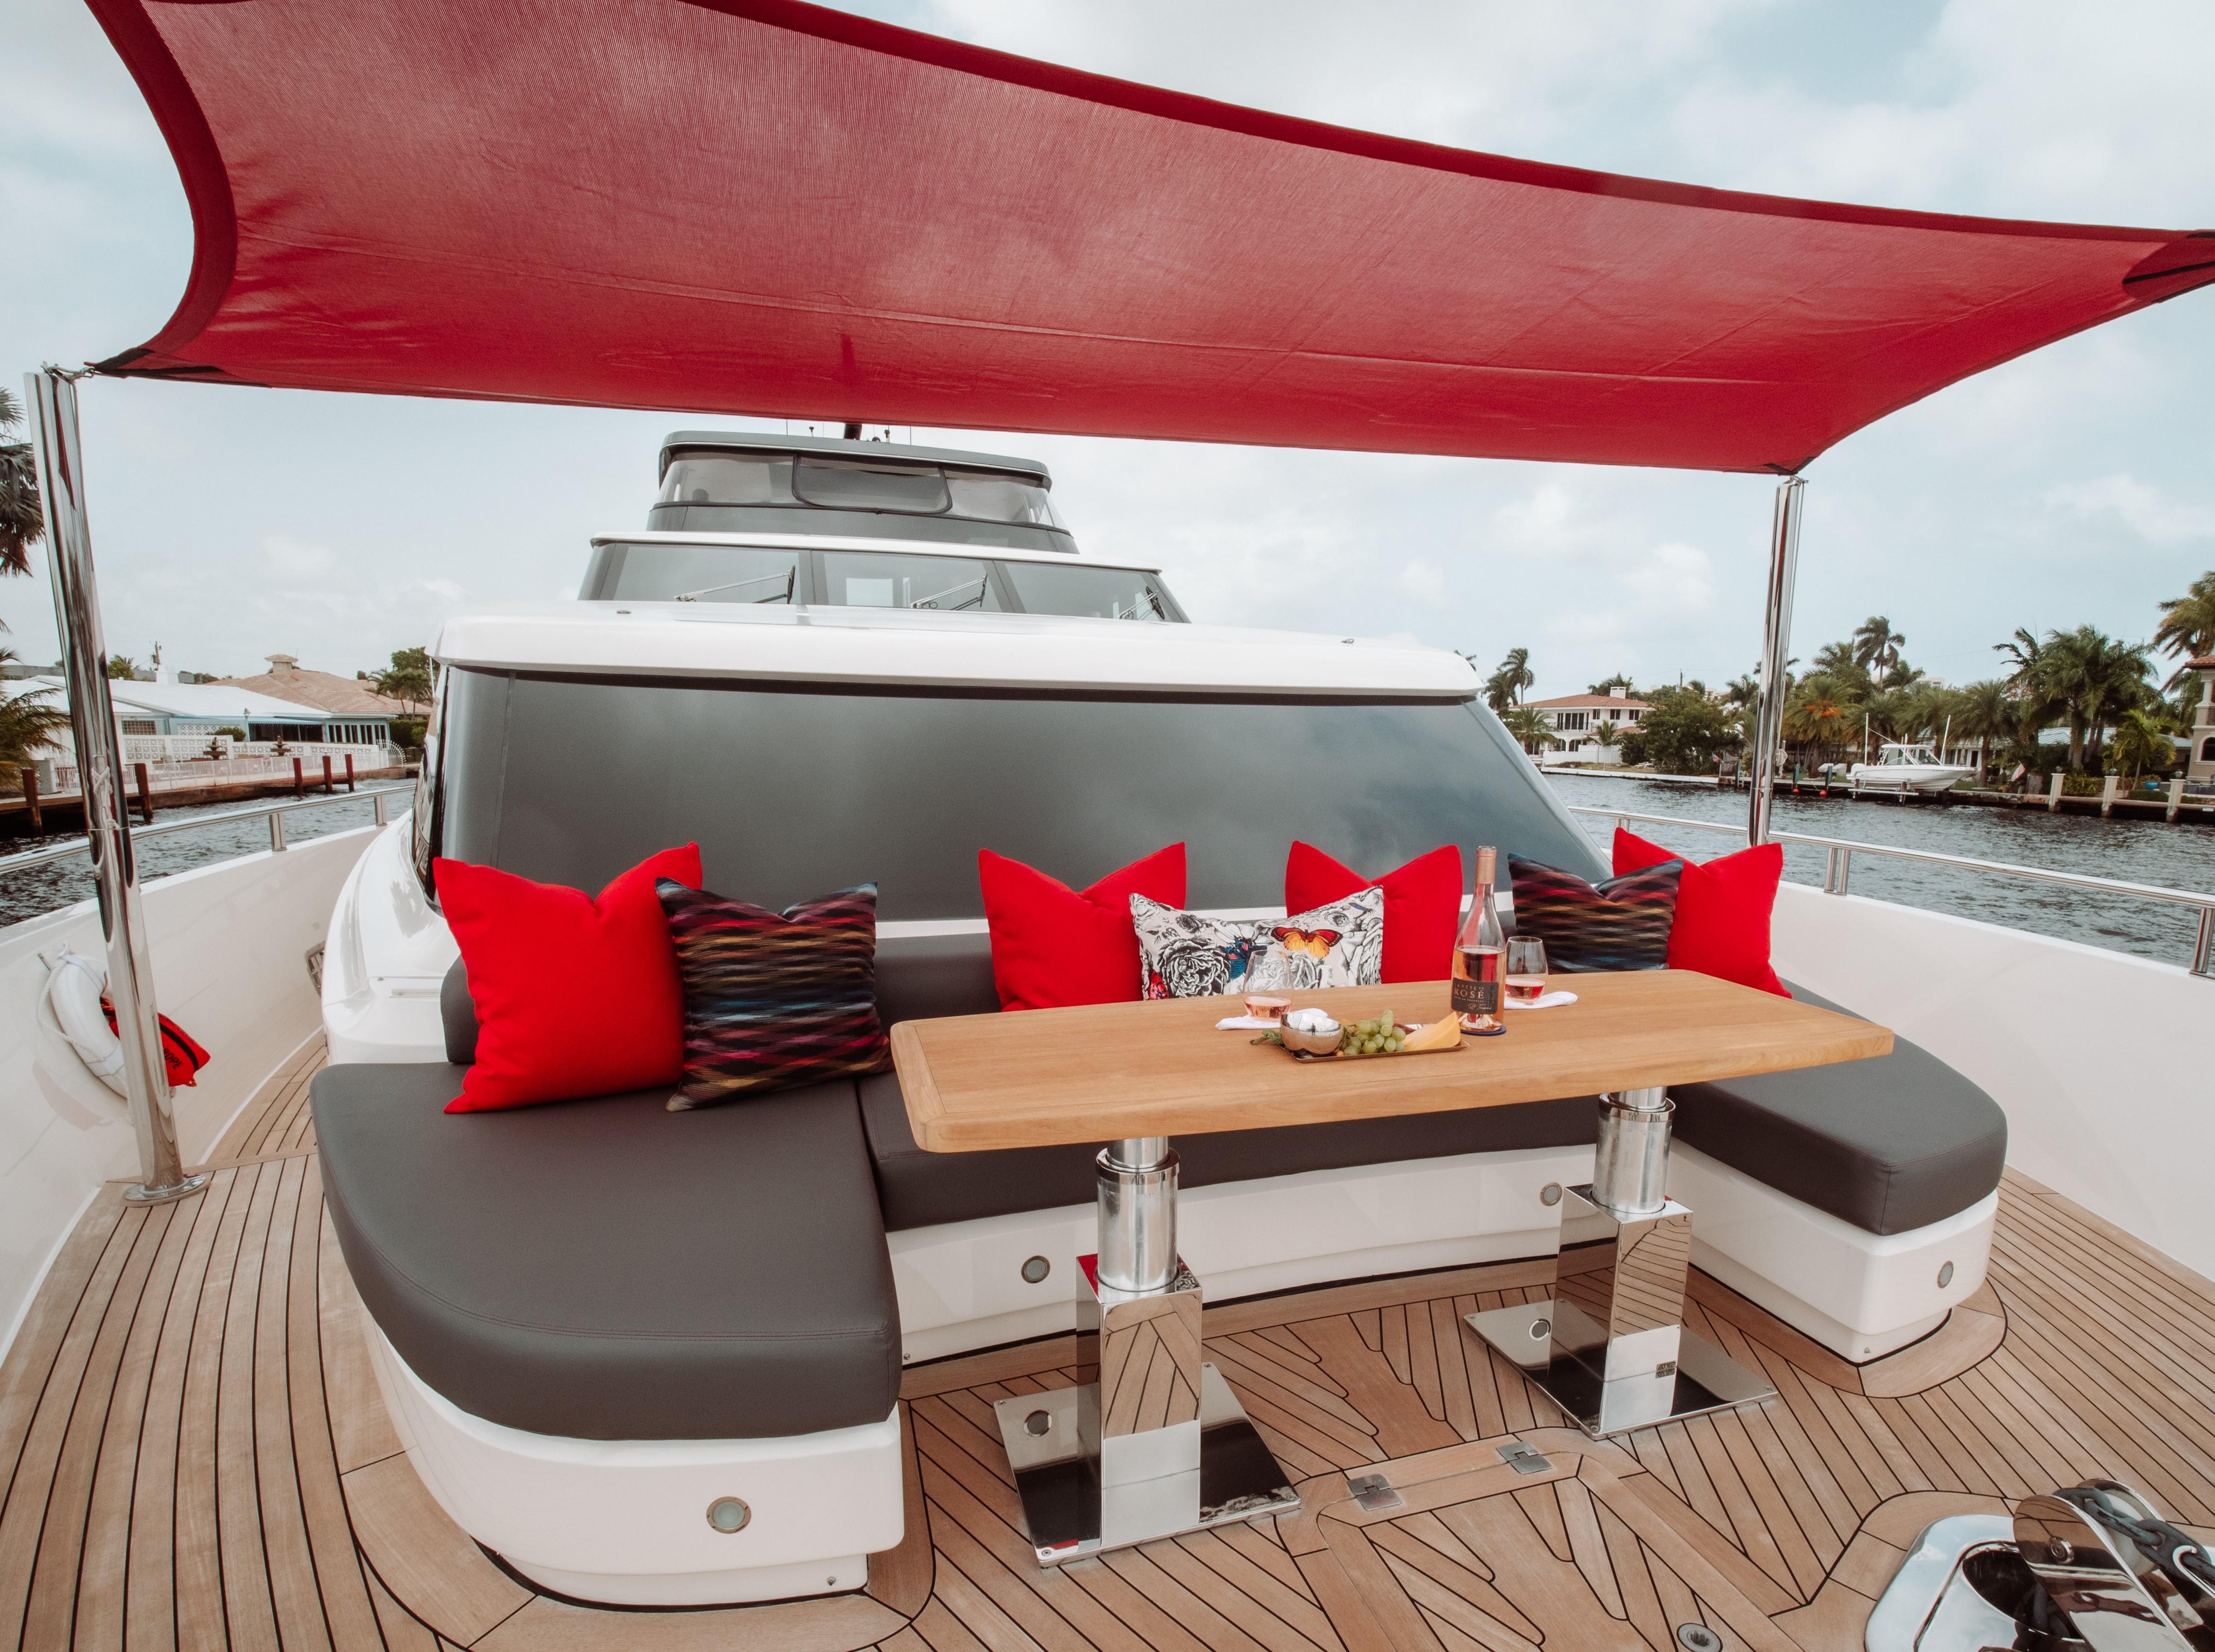 Foredeck lounge